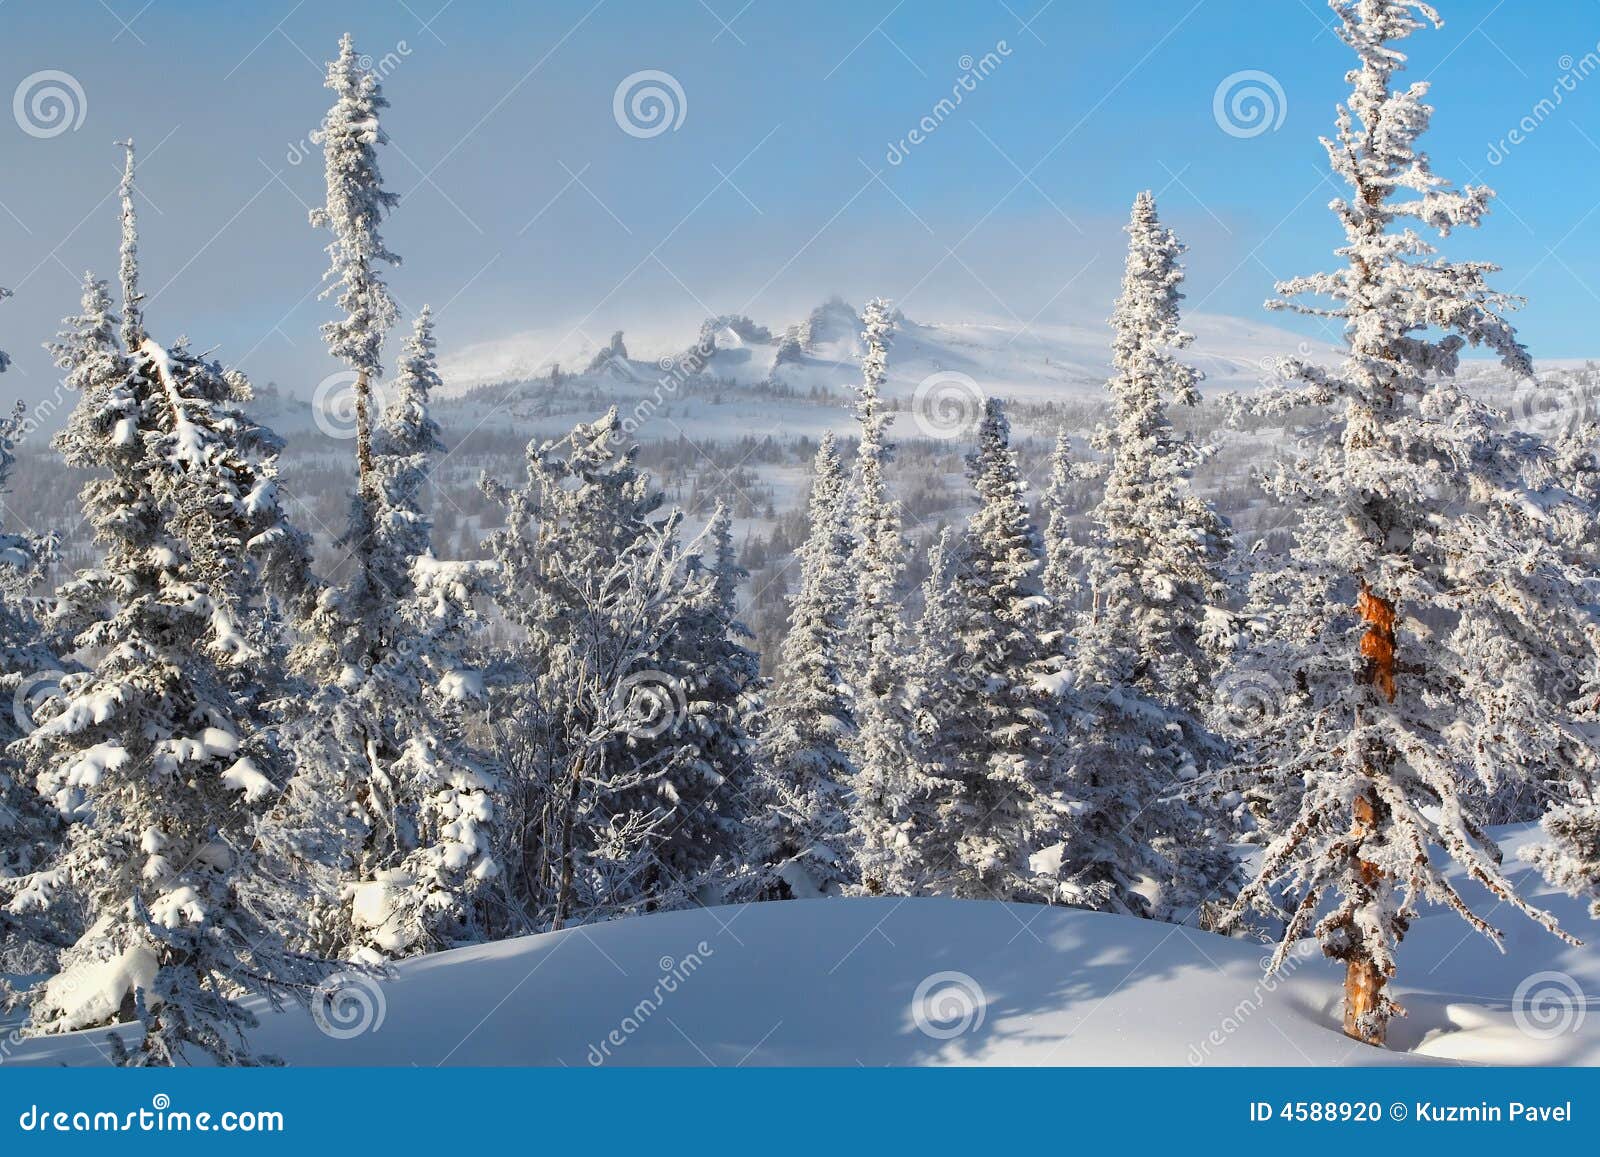 winter landscape of altai mountains